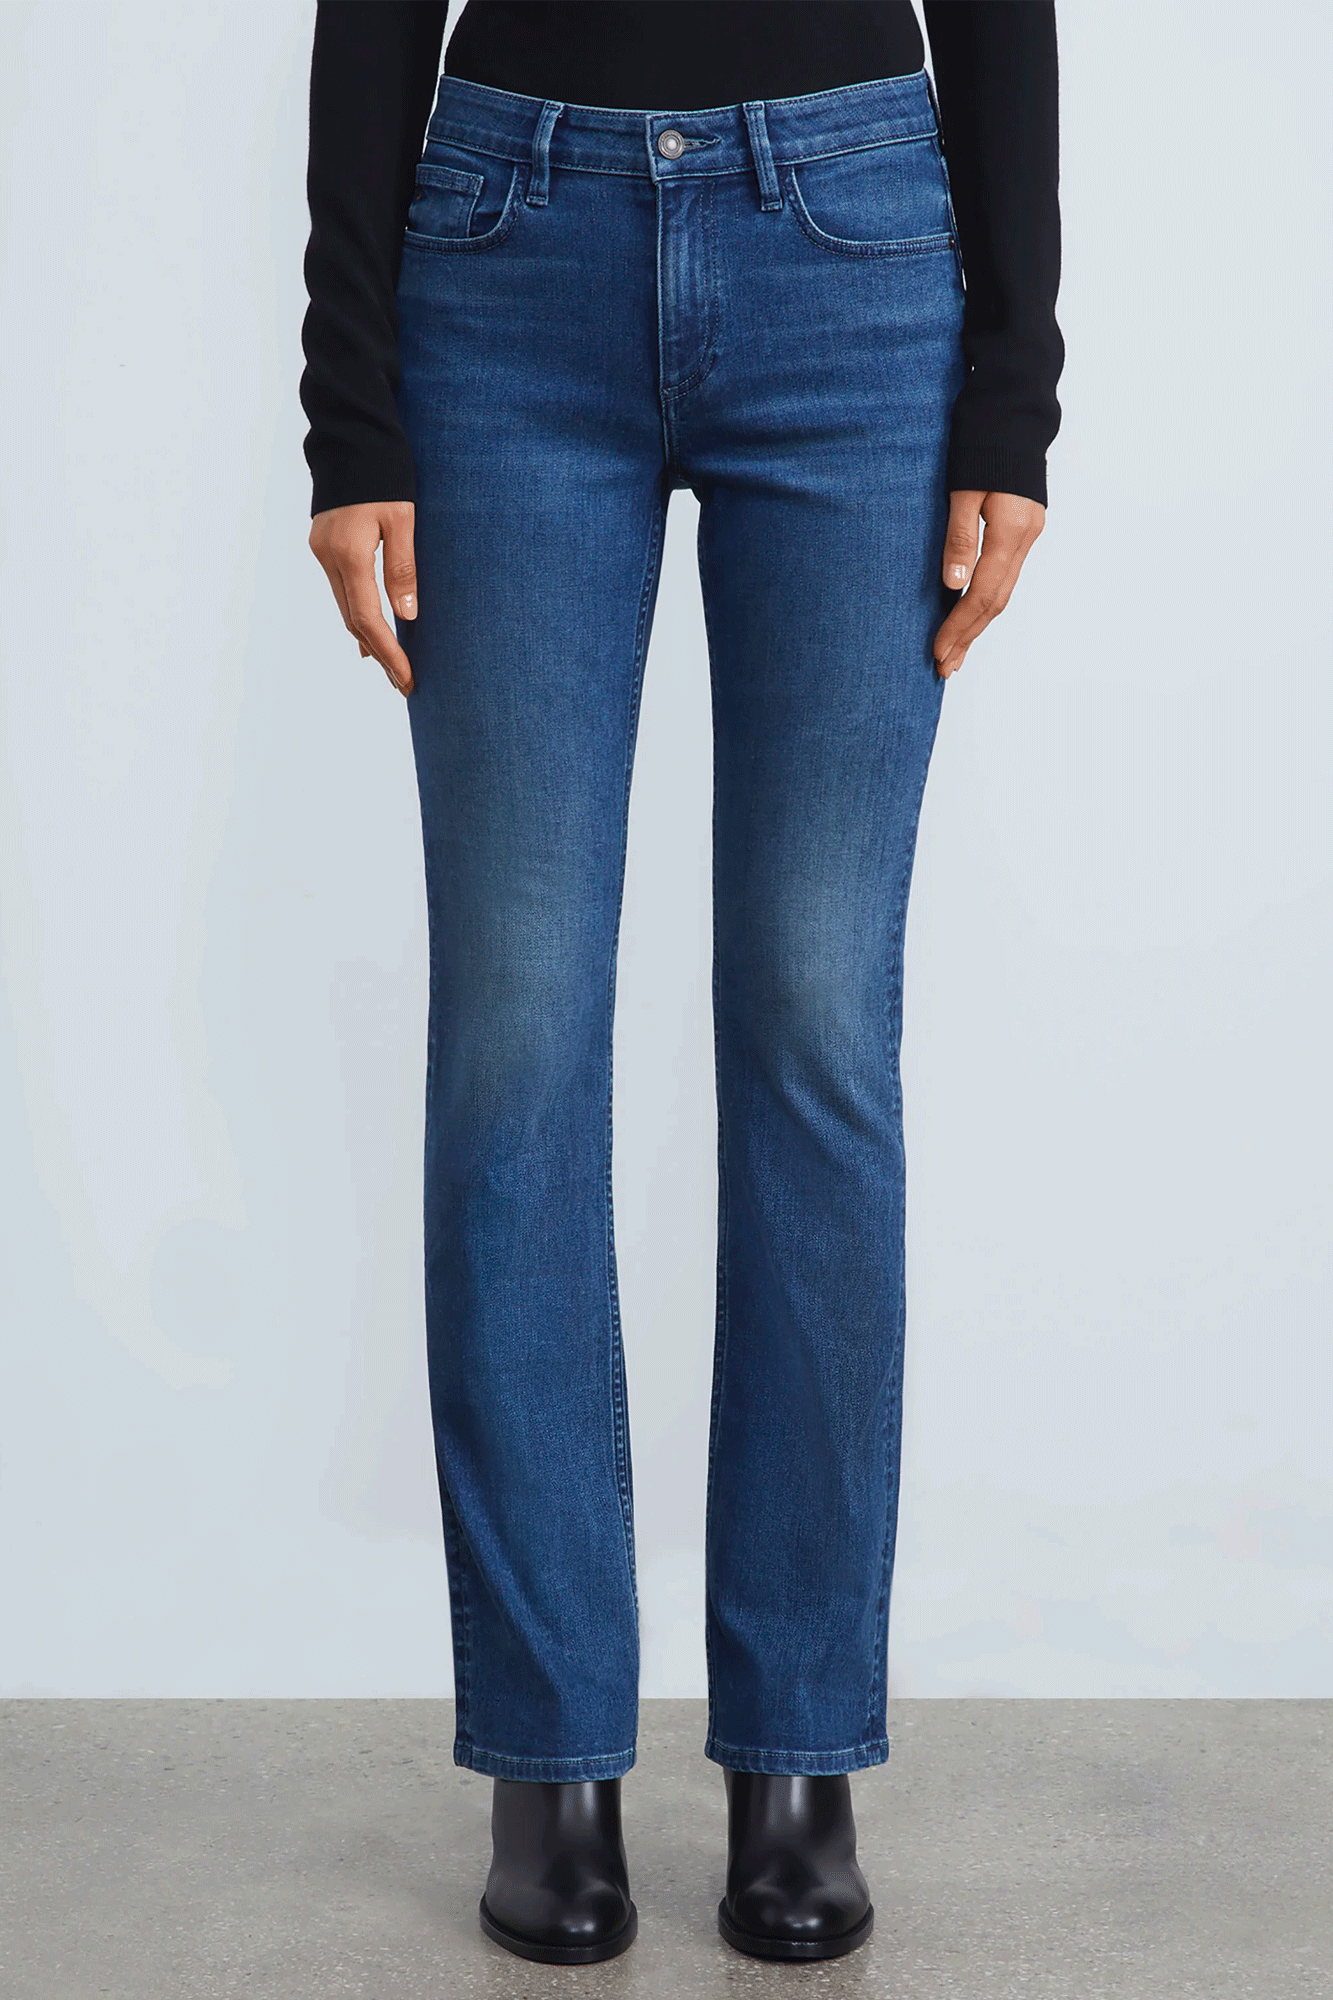 Remastered with modern proportions, the newest iteration of the Mercer Jean from Lafayette 148 features the signature sculpting